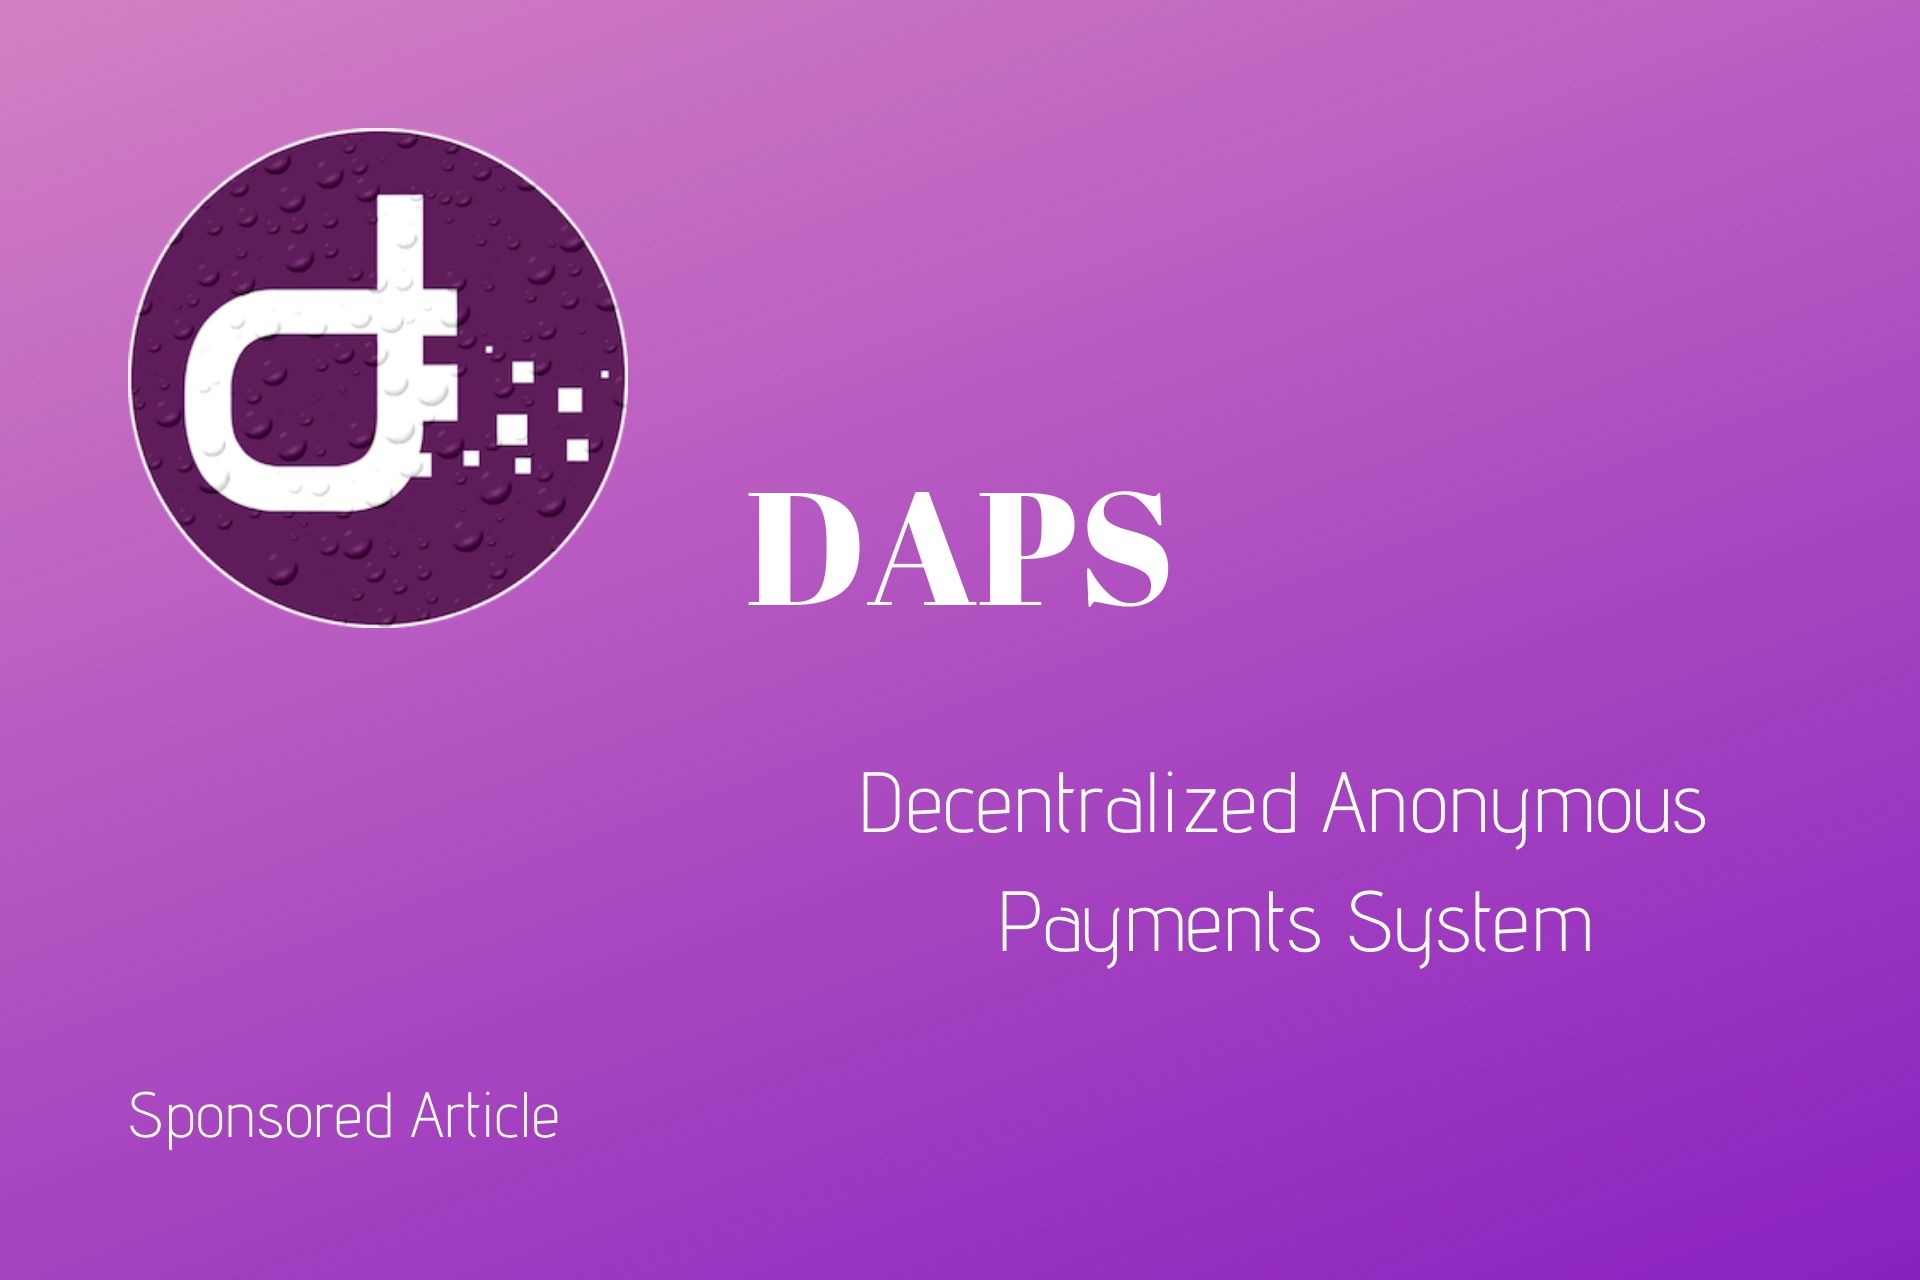 DAPS payment system